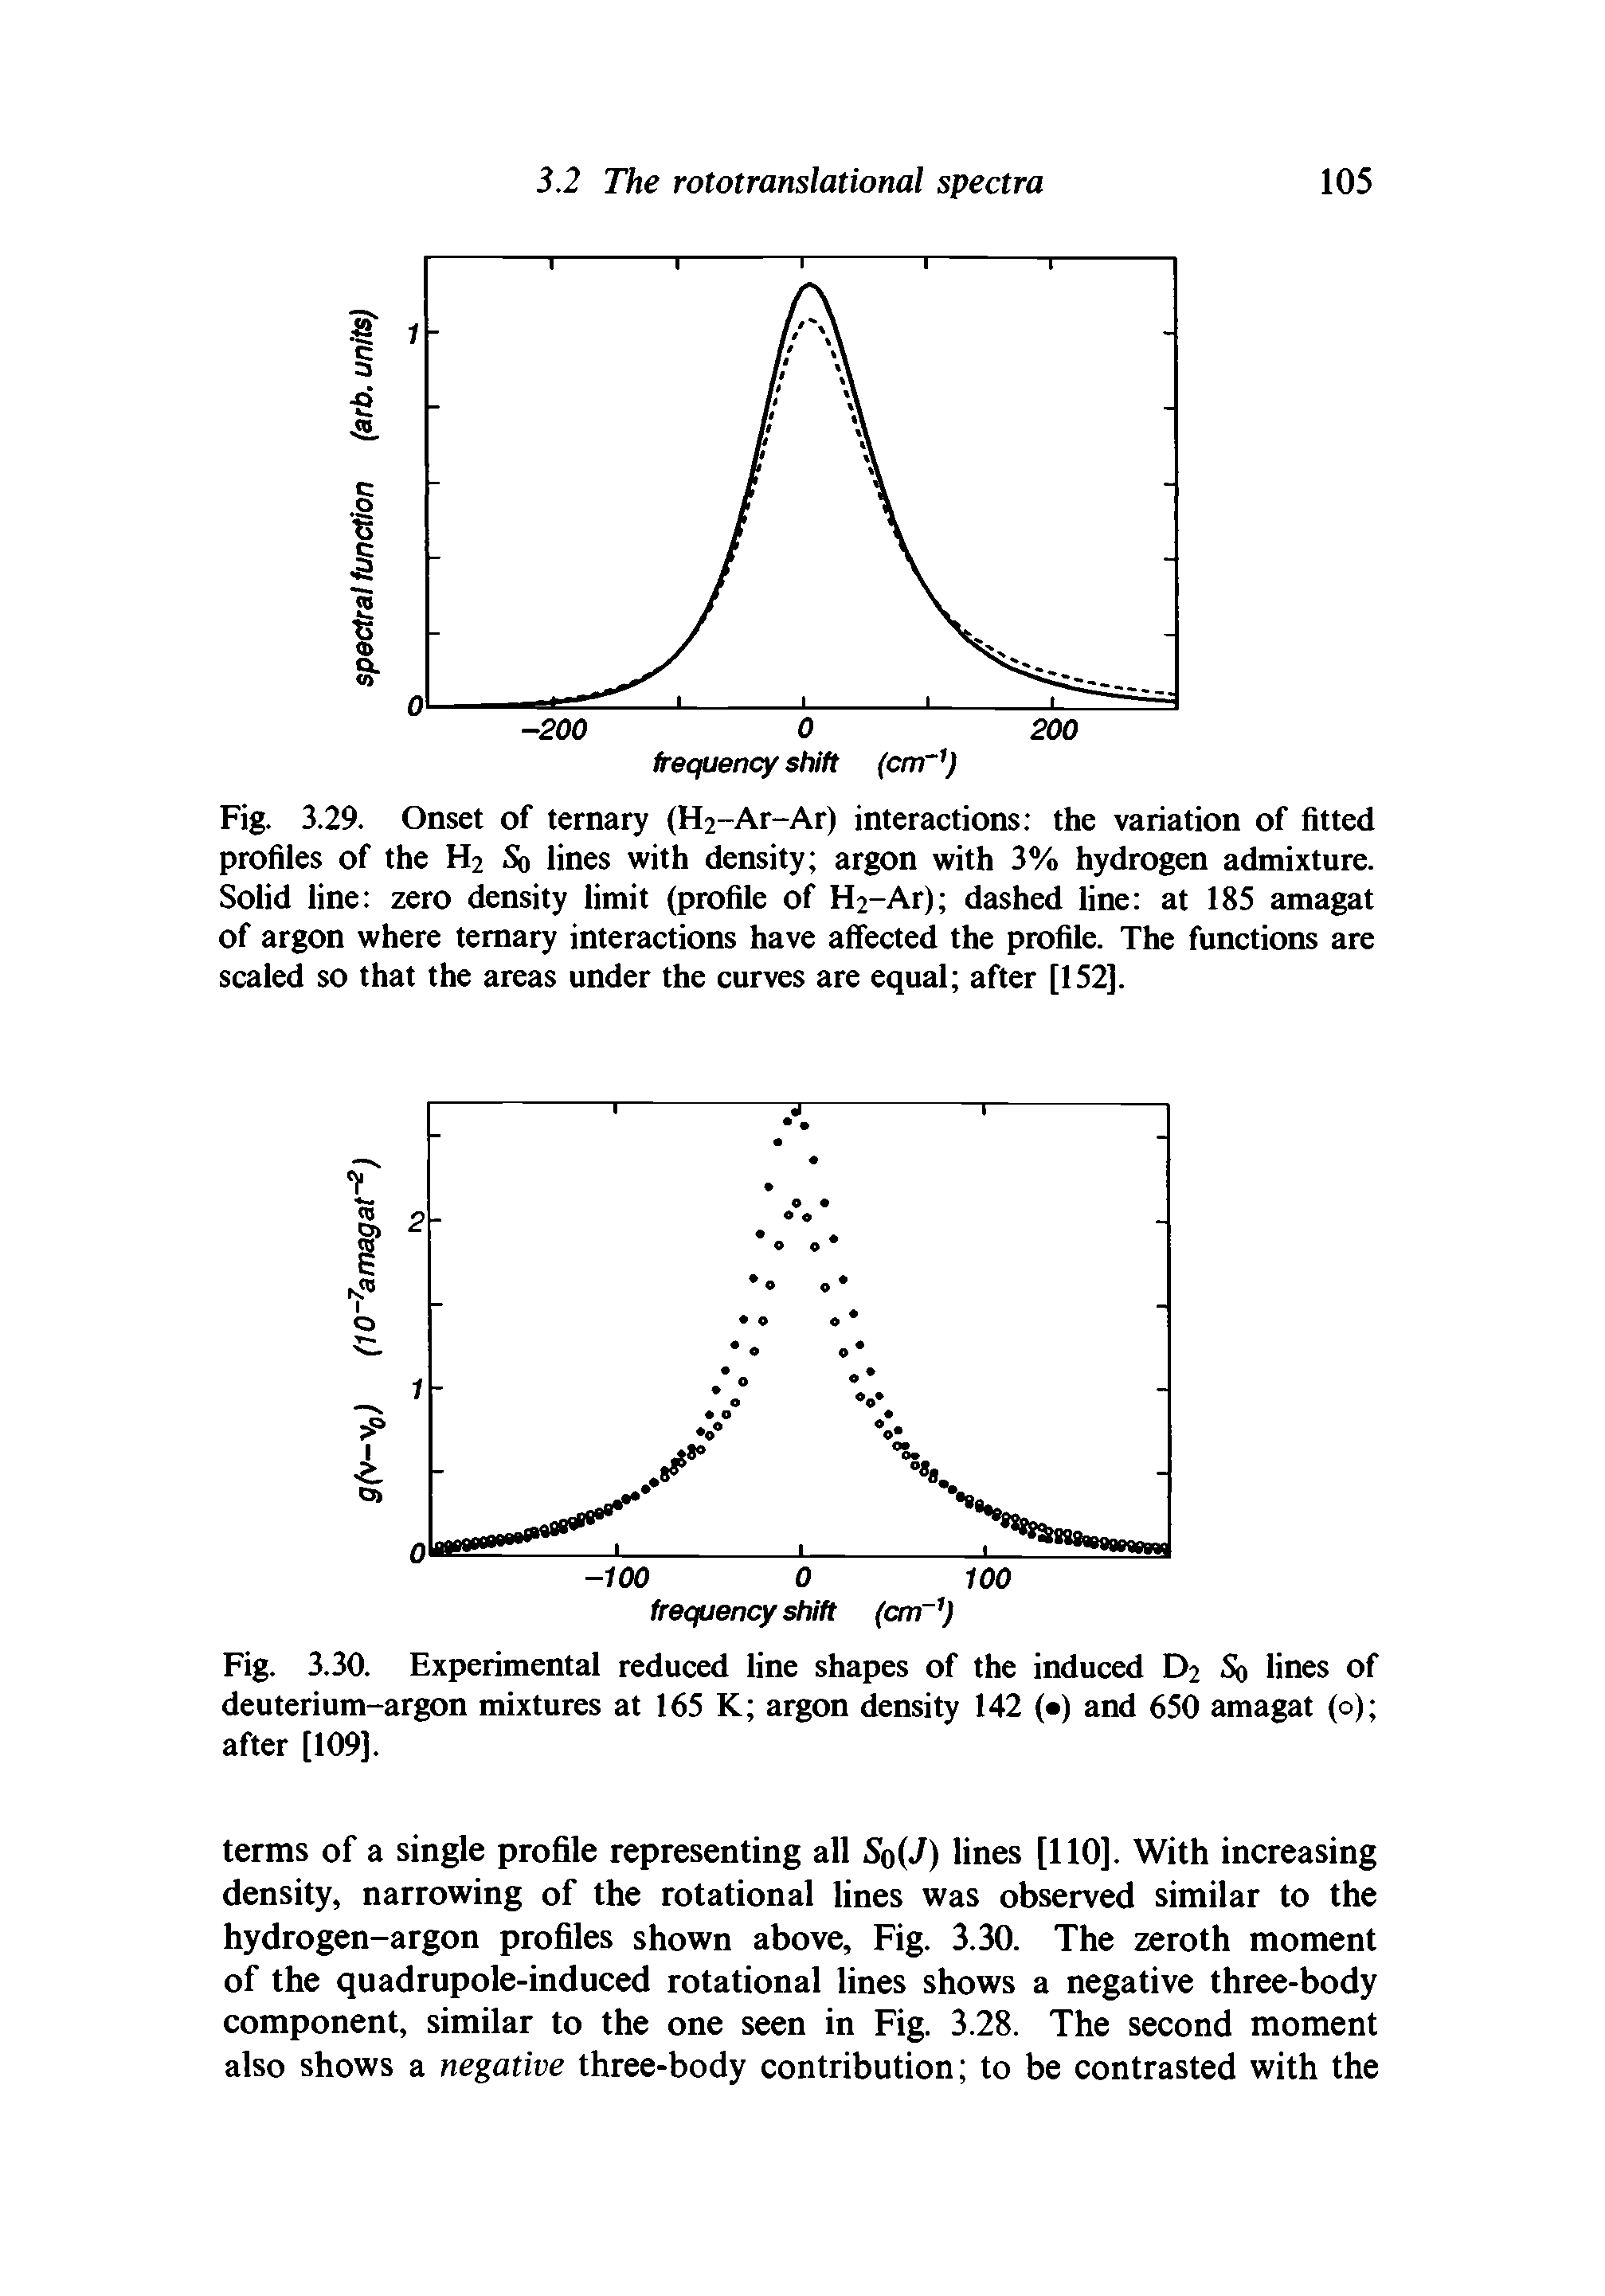 Fig. 3.29. Onset of ternary (H2-Ar-Ar) interactions the variation of fitted profiles of the H2 So lines with density argon with 3% hydrogen admixture. Solid line zero density limit (profile of H2-Ar) dashed line at 185 amagat of argon where ternary interactions have affected the profile. The functions are scaled so that the areas under the curves are equal after [152],...